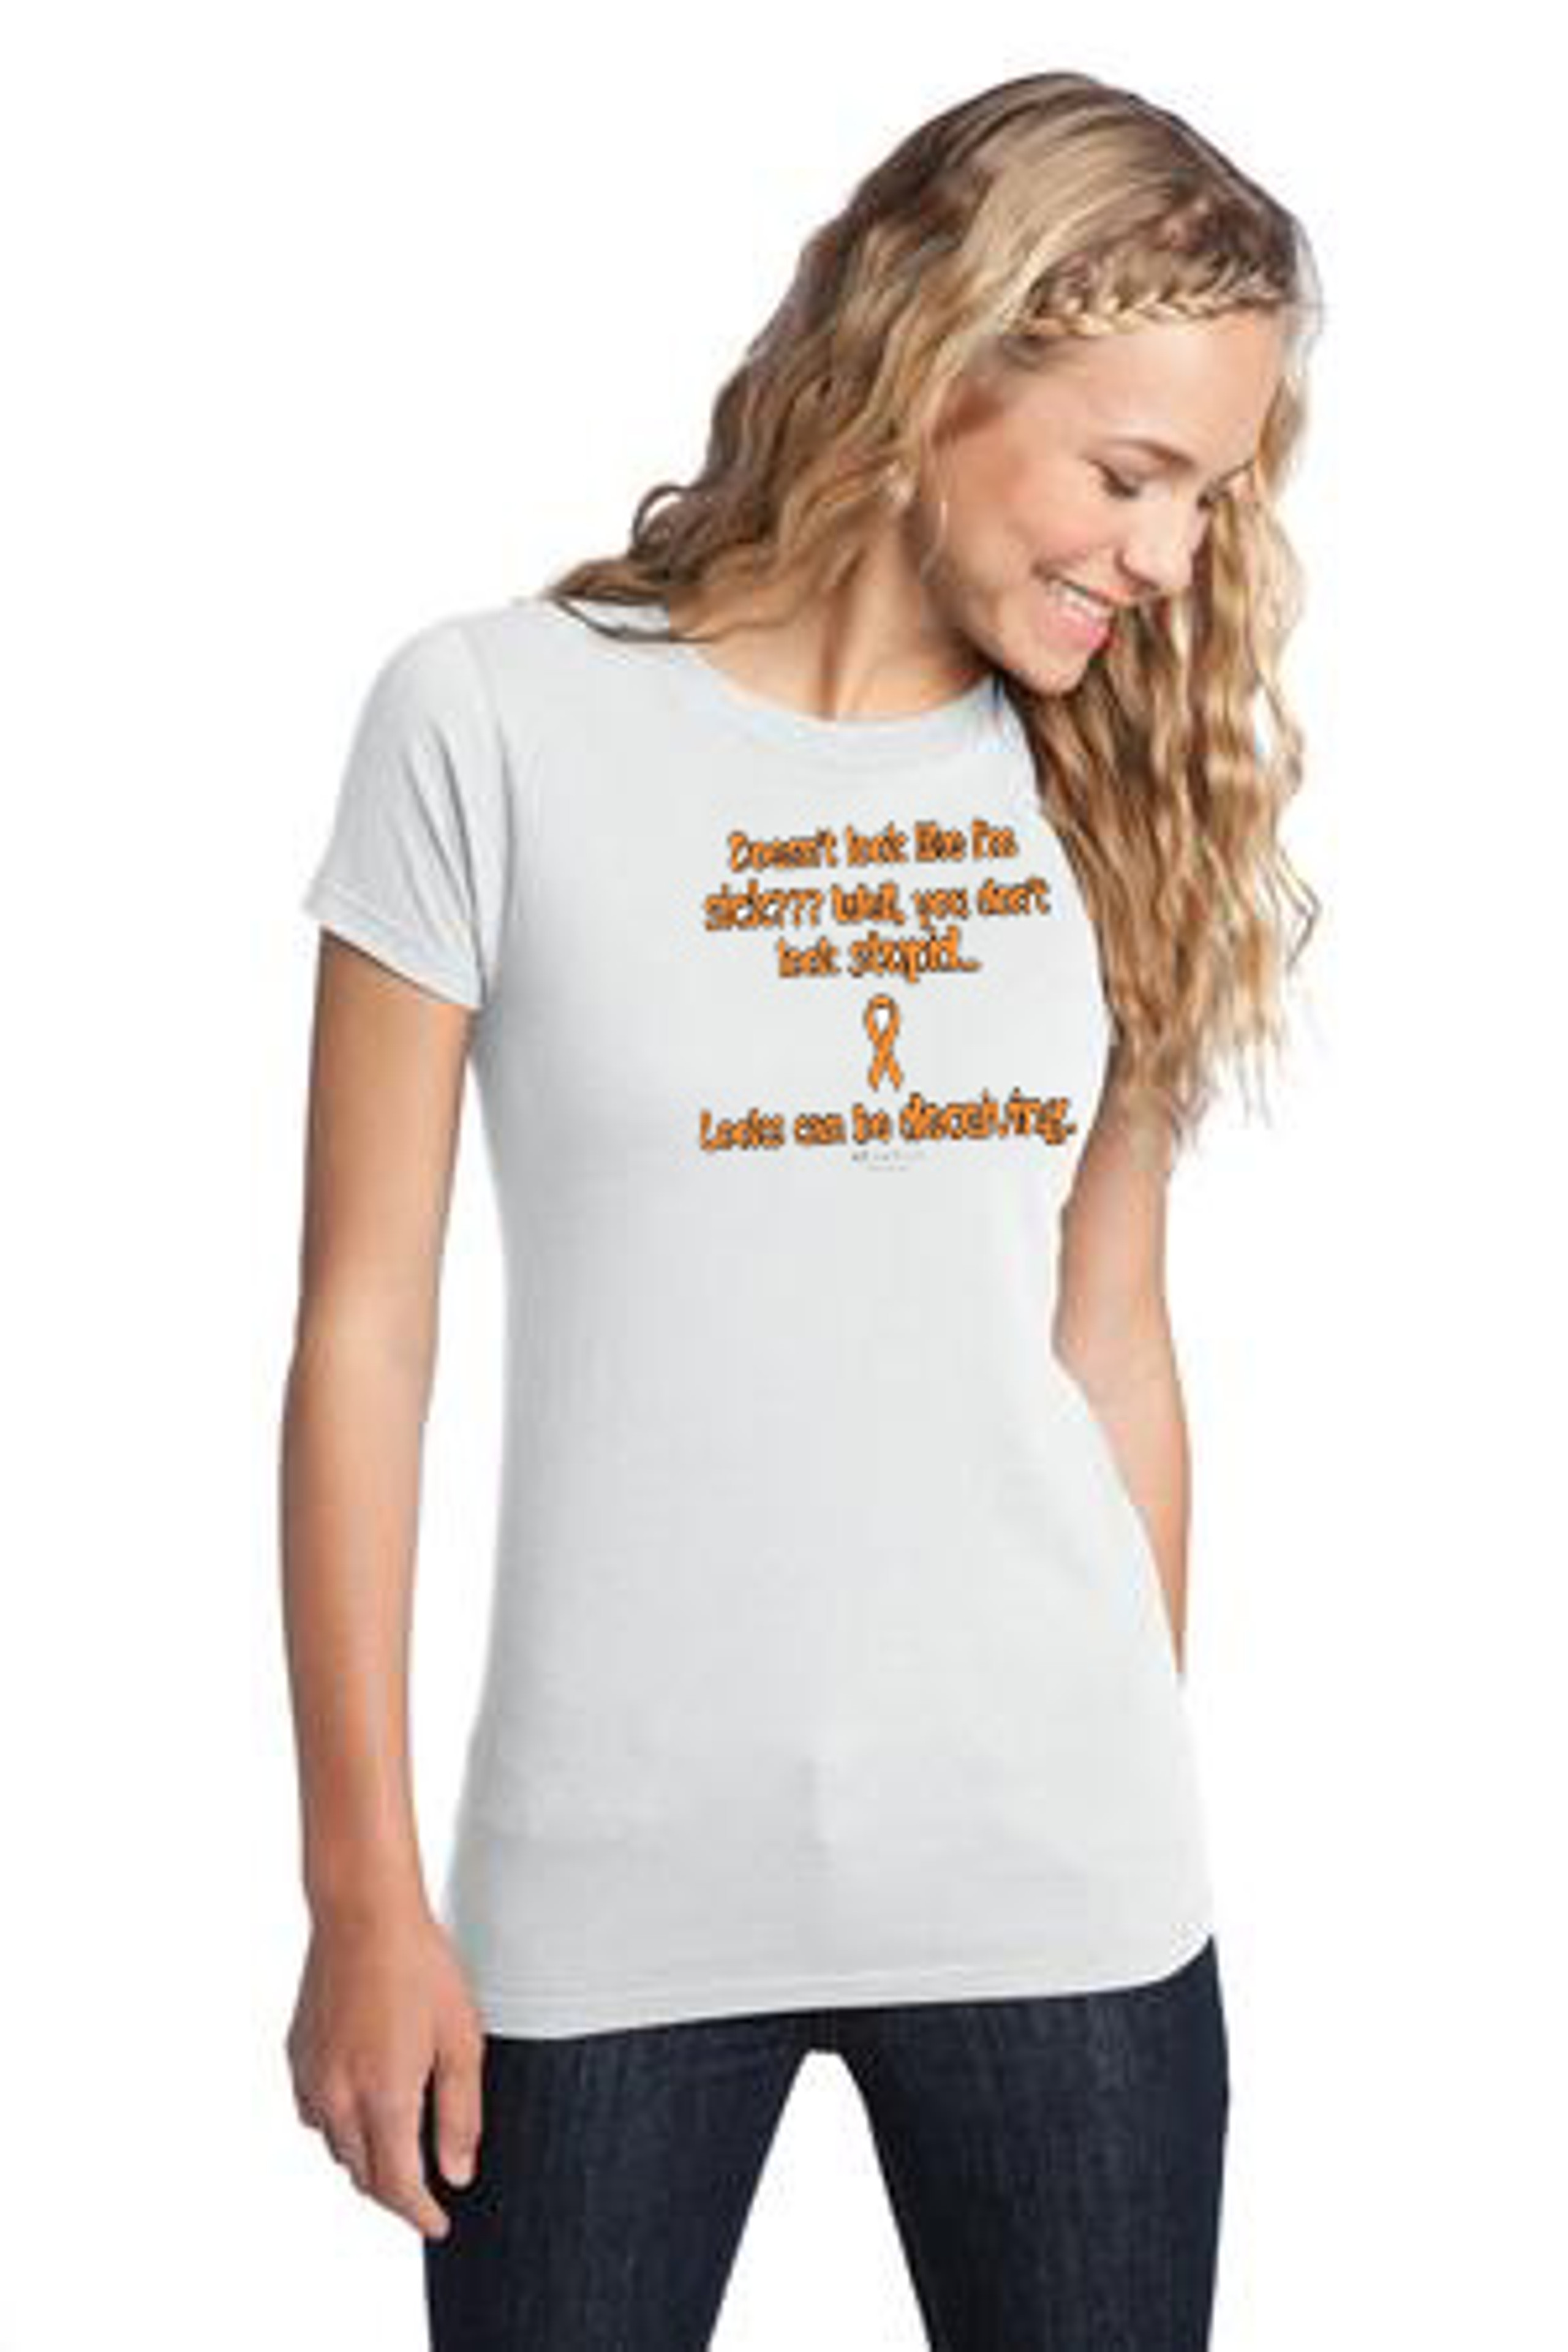 Looks Can Be Deceiving MS T-Shirt